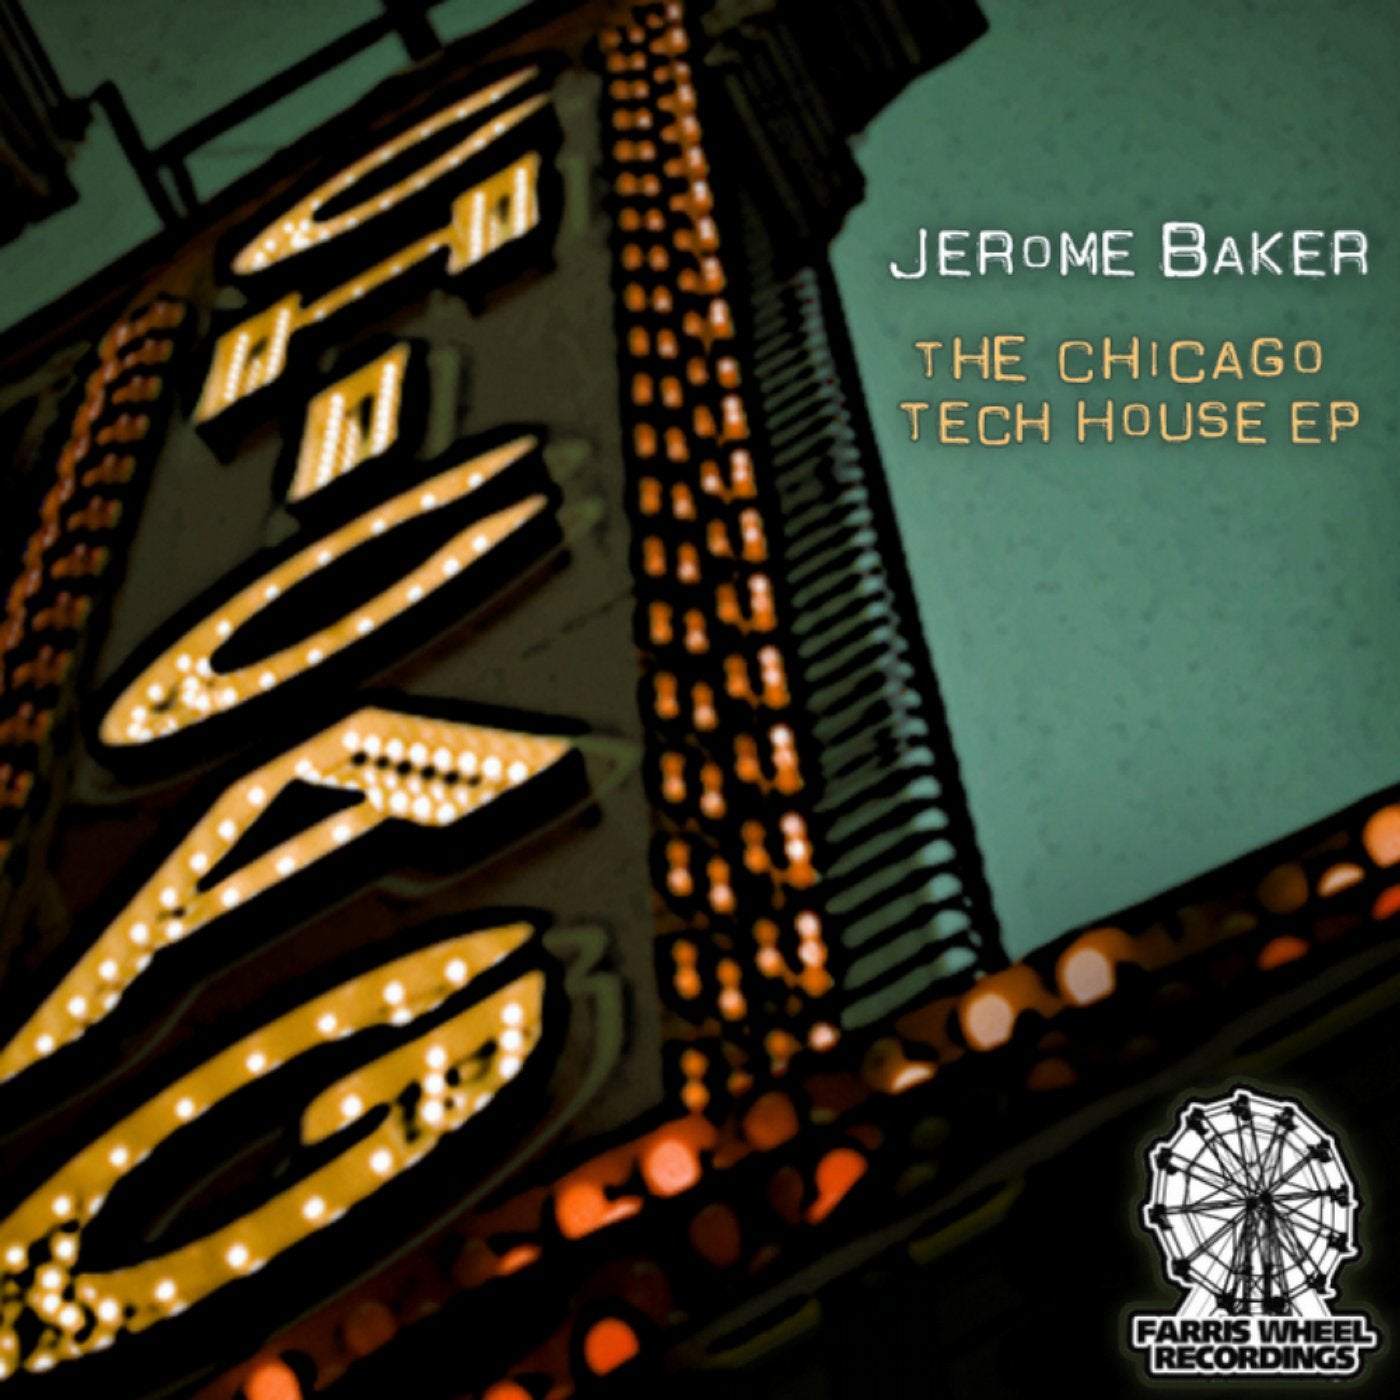 The Chicago Tech House EP